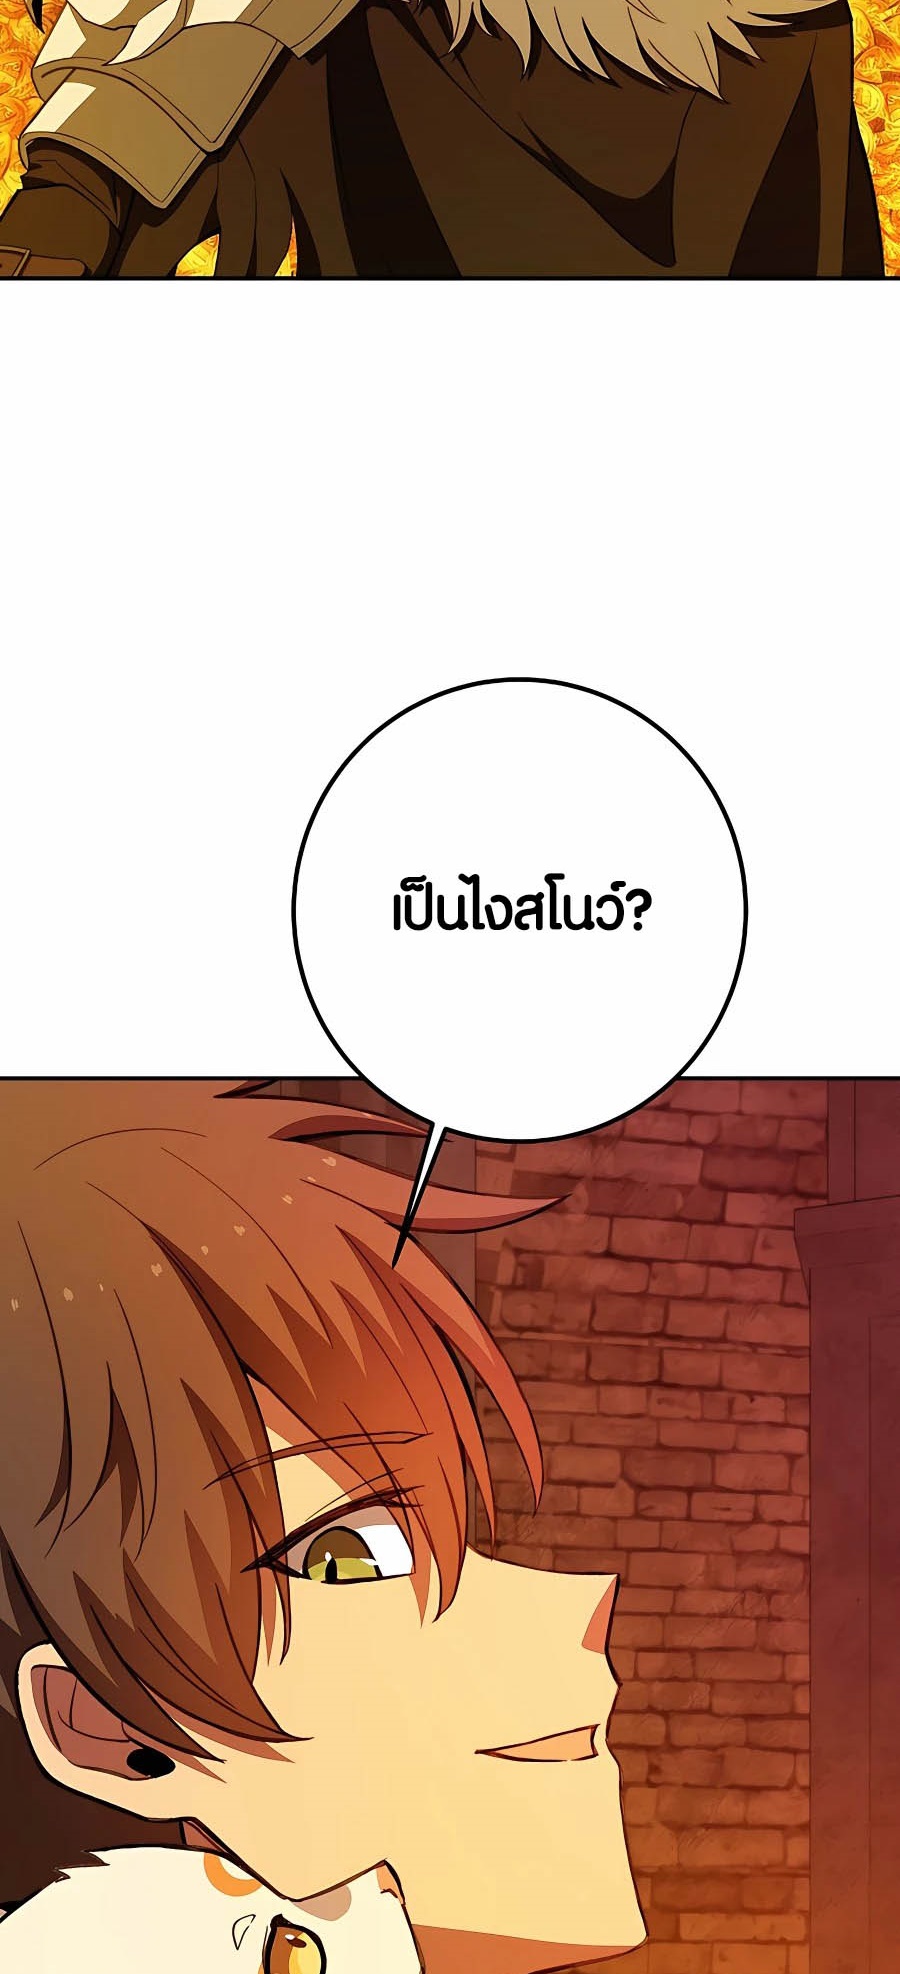 à¸­à¹ˆà¸²à¸™à¸¡à¸±à¸™à¸®à¸§à¸² à¹€à¸£à¸·à¹ˆà¸­à¸‡ The Part Time Land of the Gods 56 74